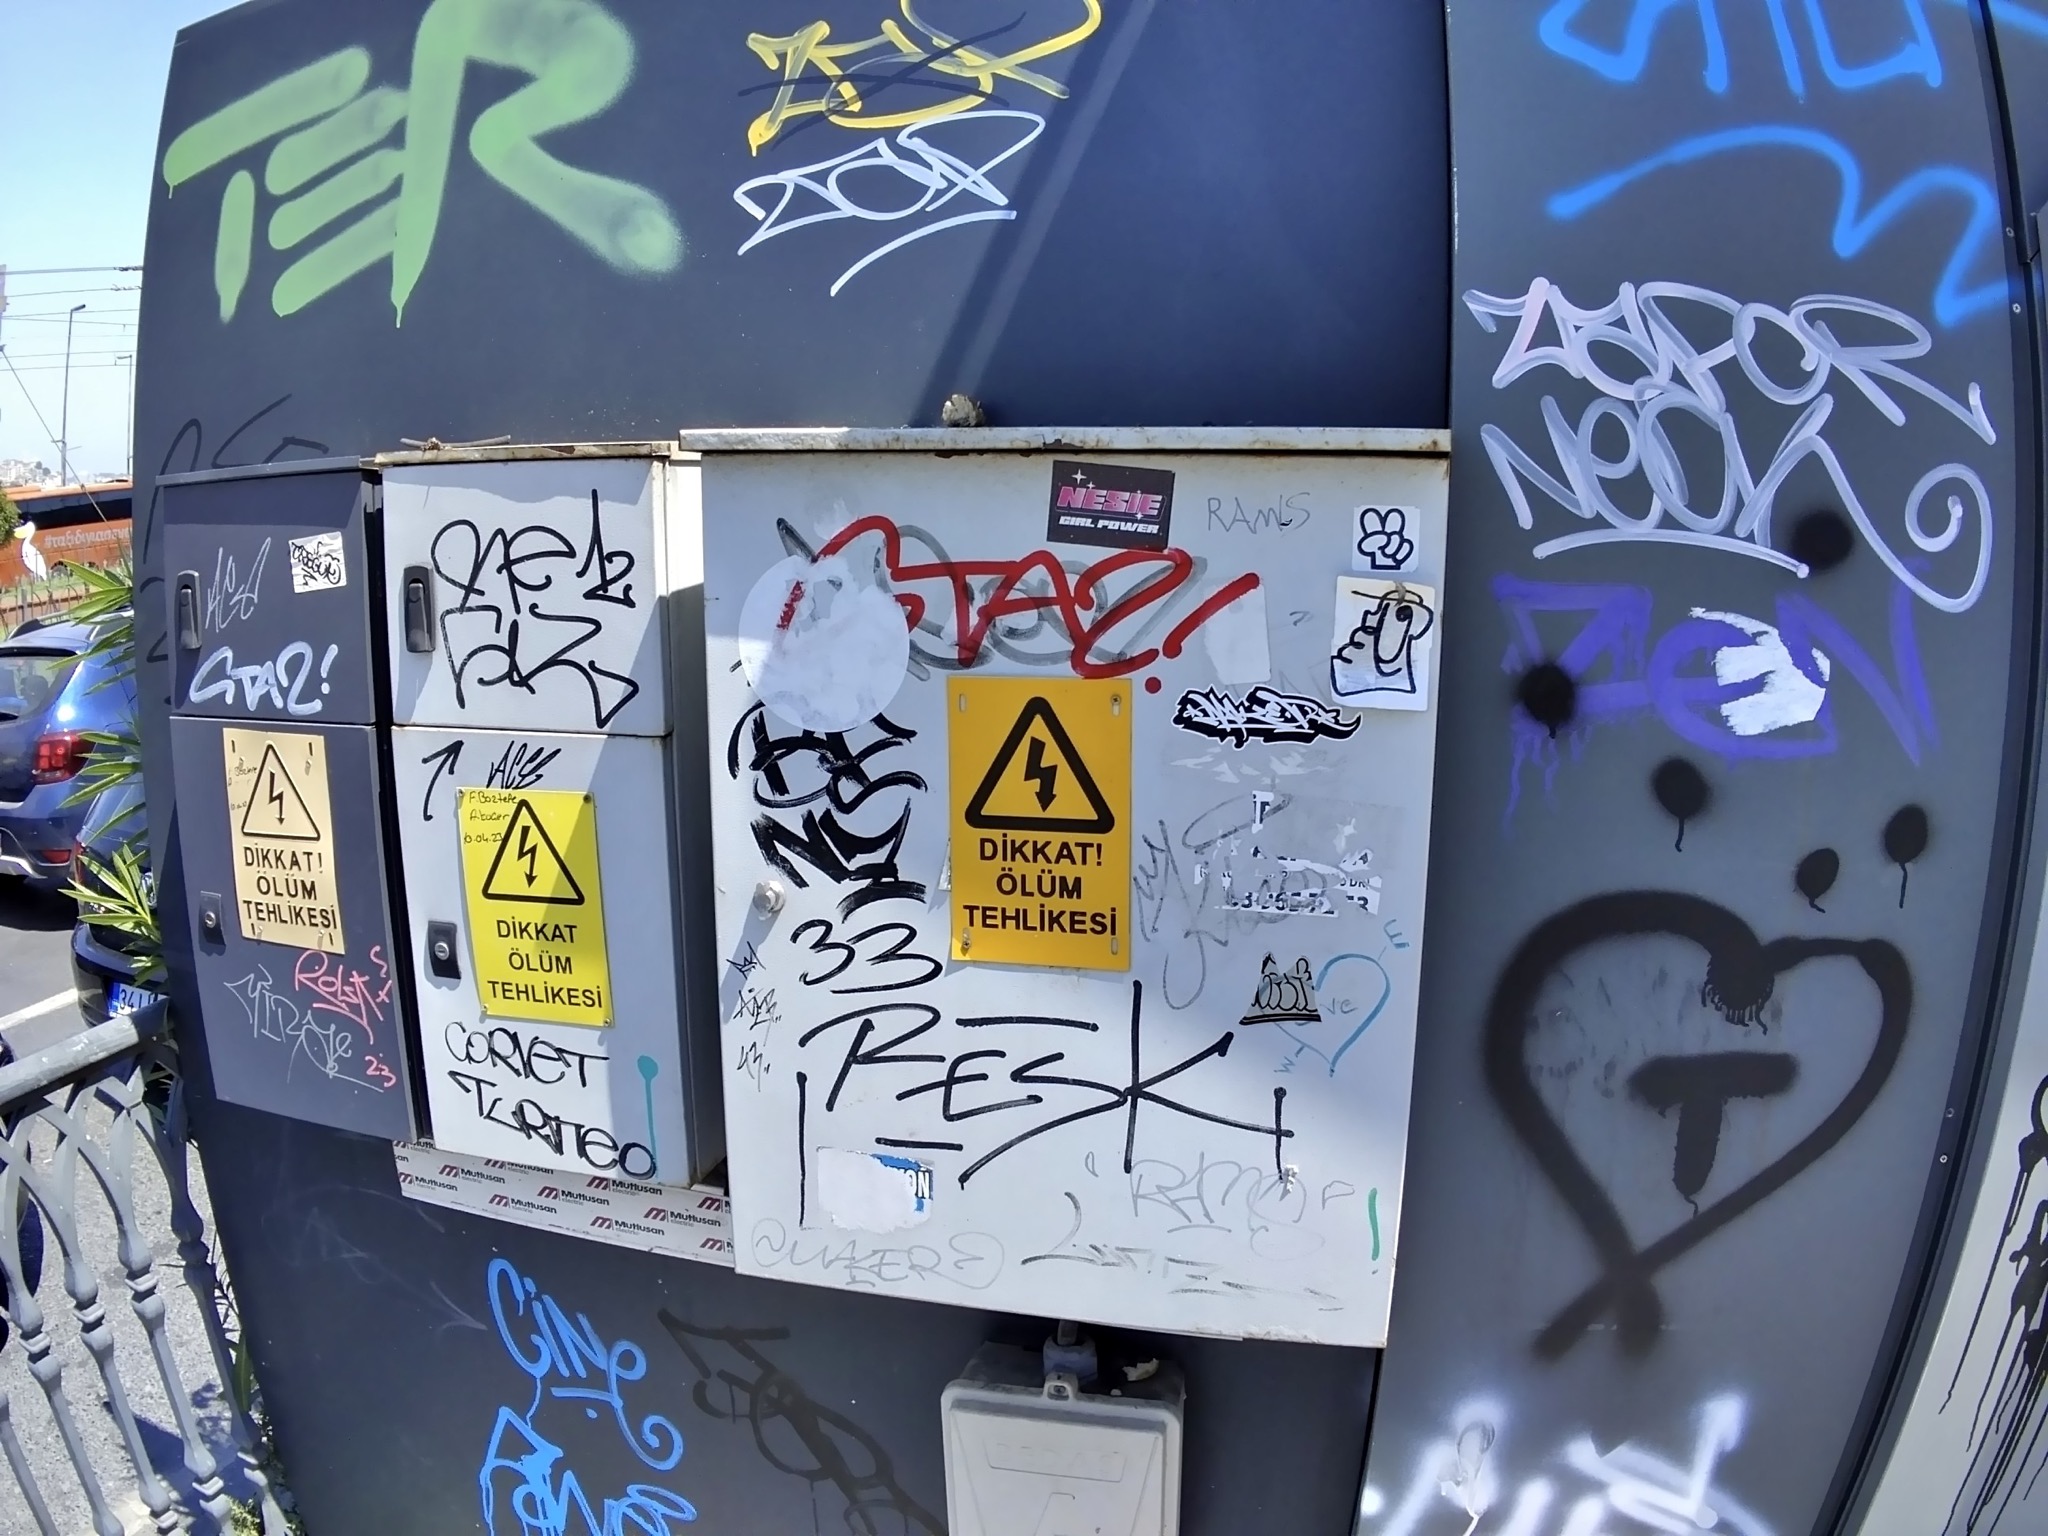 A power transformer box on the street with stickers and graffiti